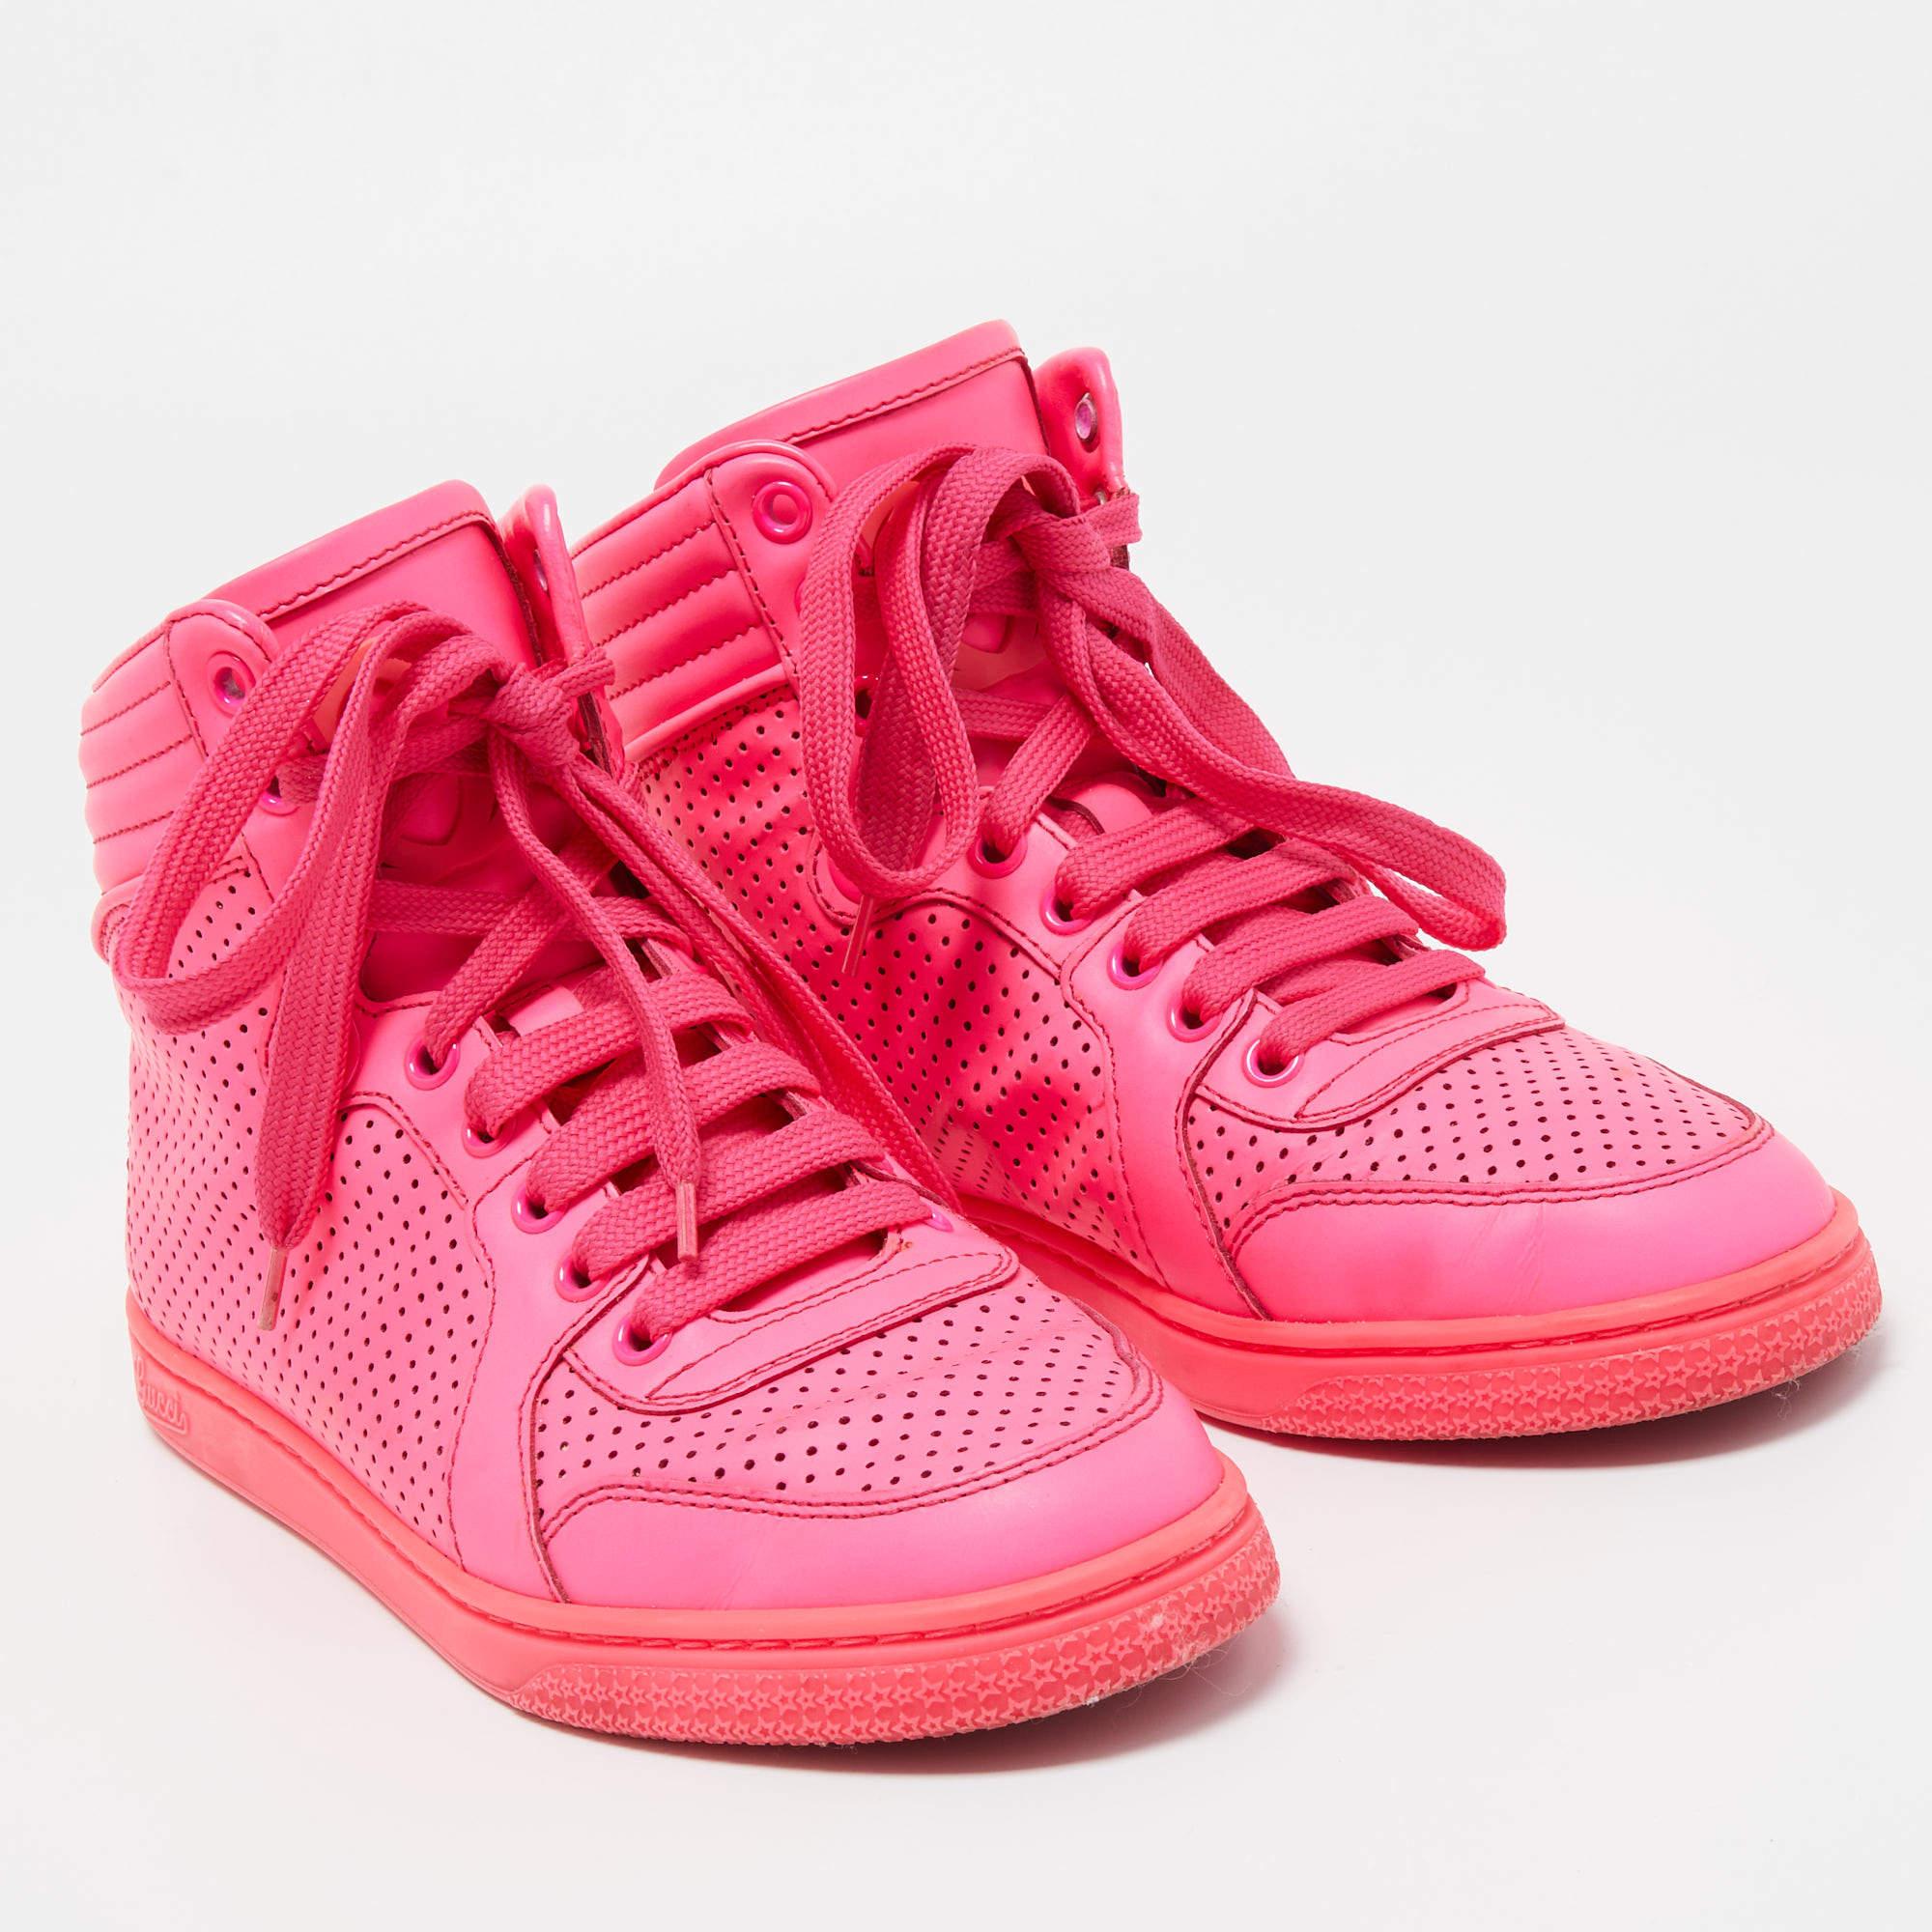 Gucci Neon Pink Perforated Leather Coda High Top Sneakers Size 35.5 In Good Condition For Sale In Dubai, Al Qouz 2